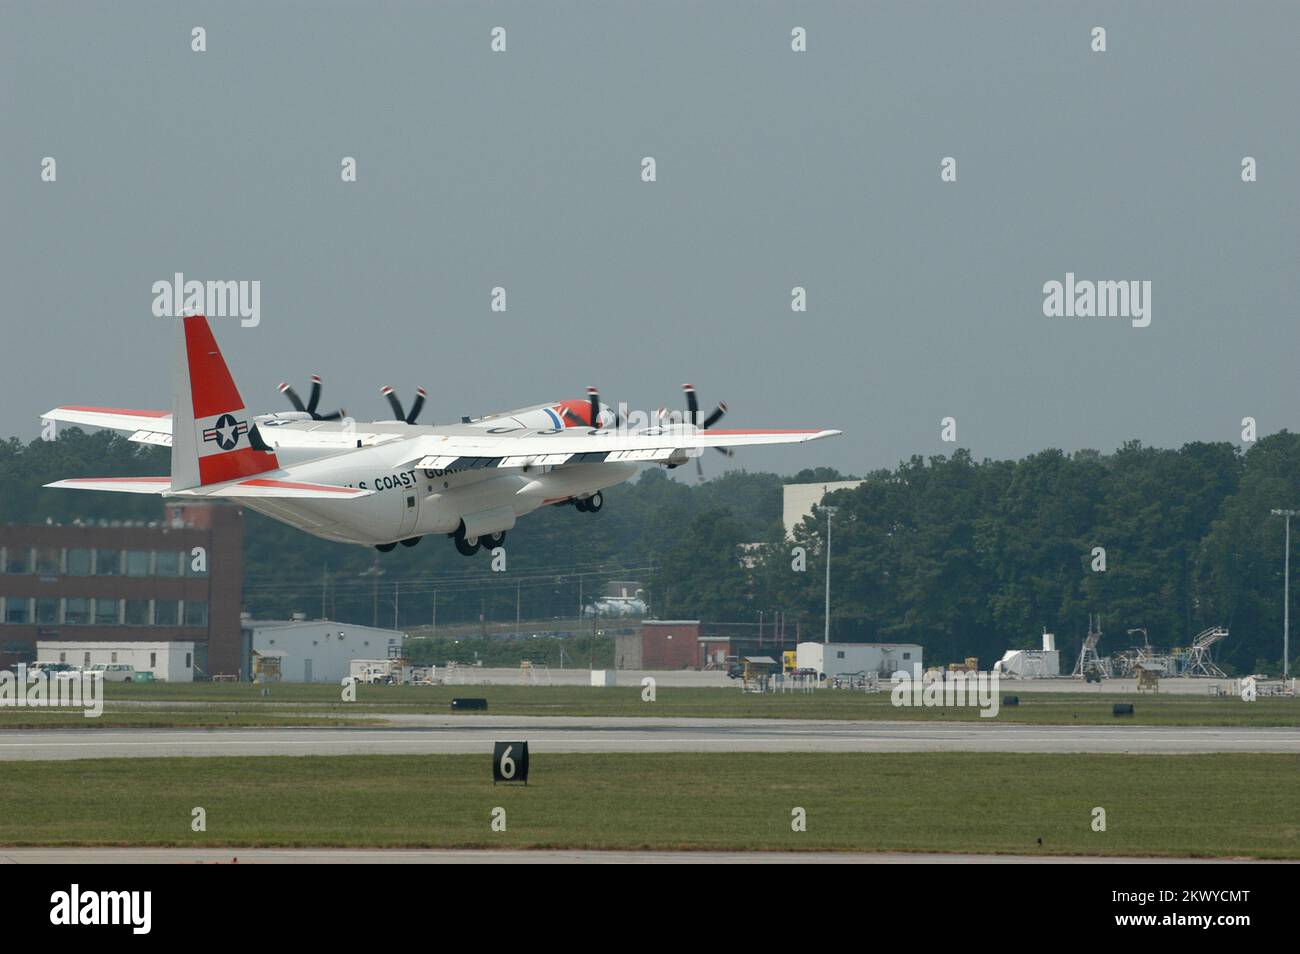 Marietta, GA, August 16, 2007   A U.S. Coast Guard C130J cargo plane containing the FEMA Federal Incident Response Support Team (FIRSTeam) takes off for Puerto Rico to respond to impacts from Hurricane Dean. The FIRSTeam leads FEMA's initial response to disasters. Mark Wolfe/FEMA.. Photographs Relating to Disasters and Emergency Management Programs, Activities, and Officials Stock Photo